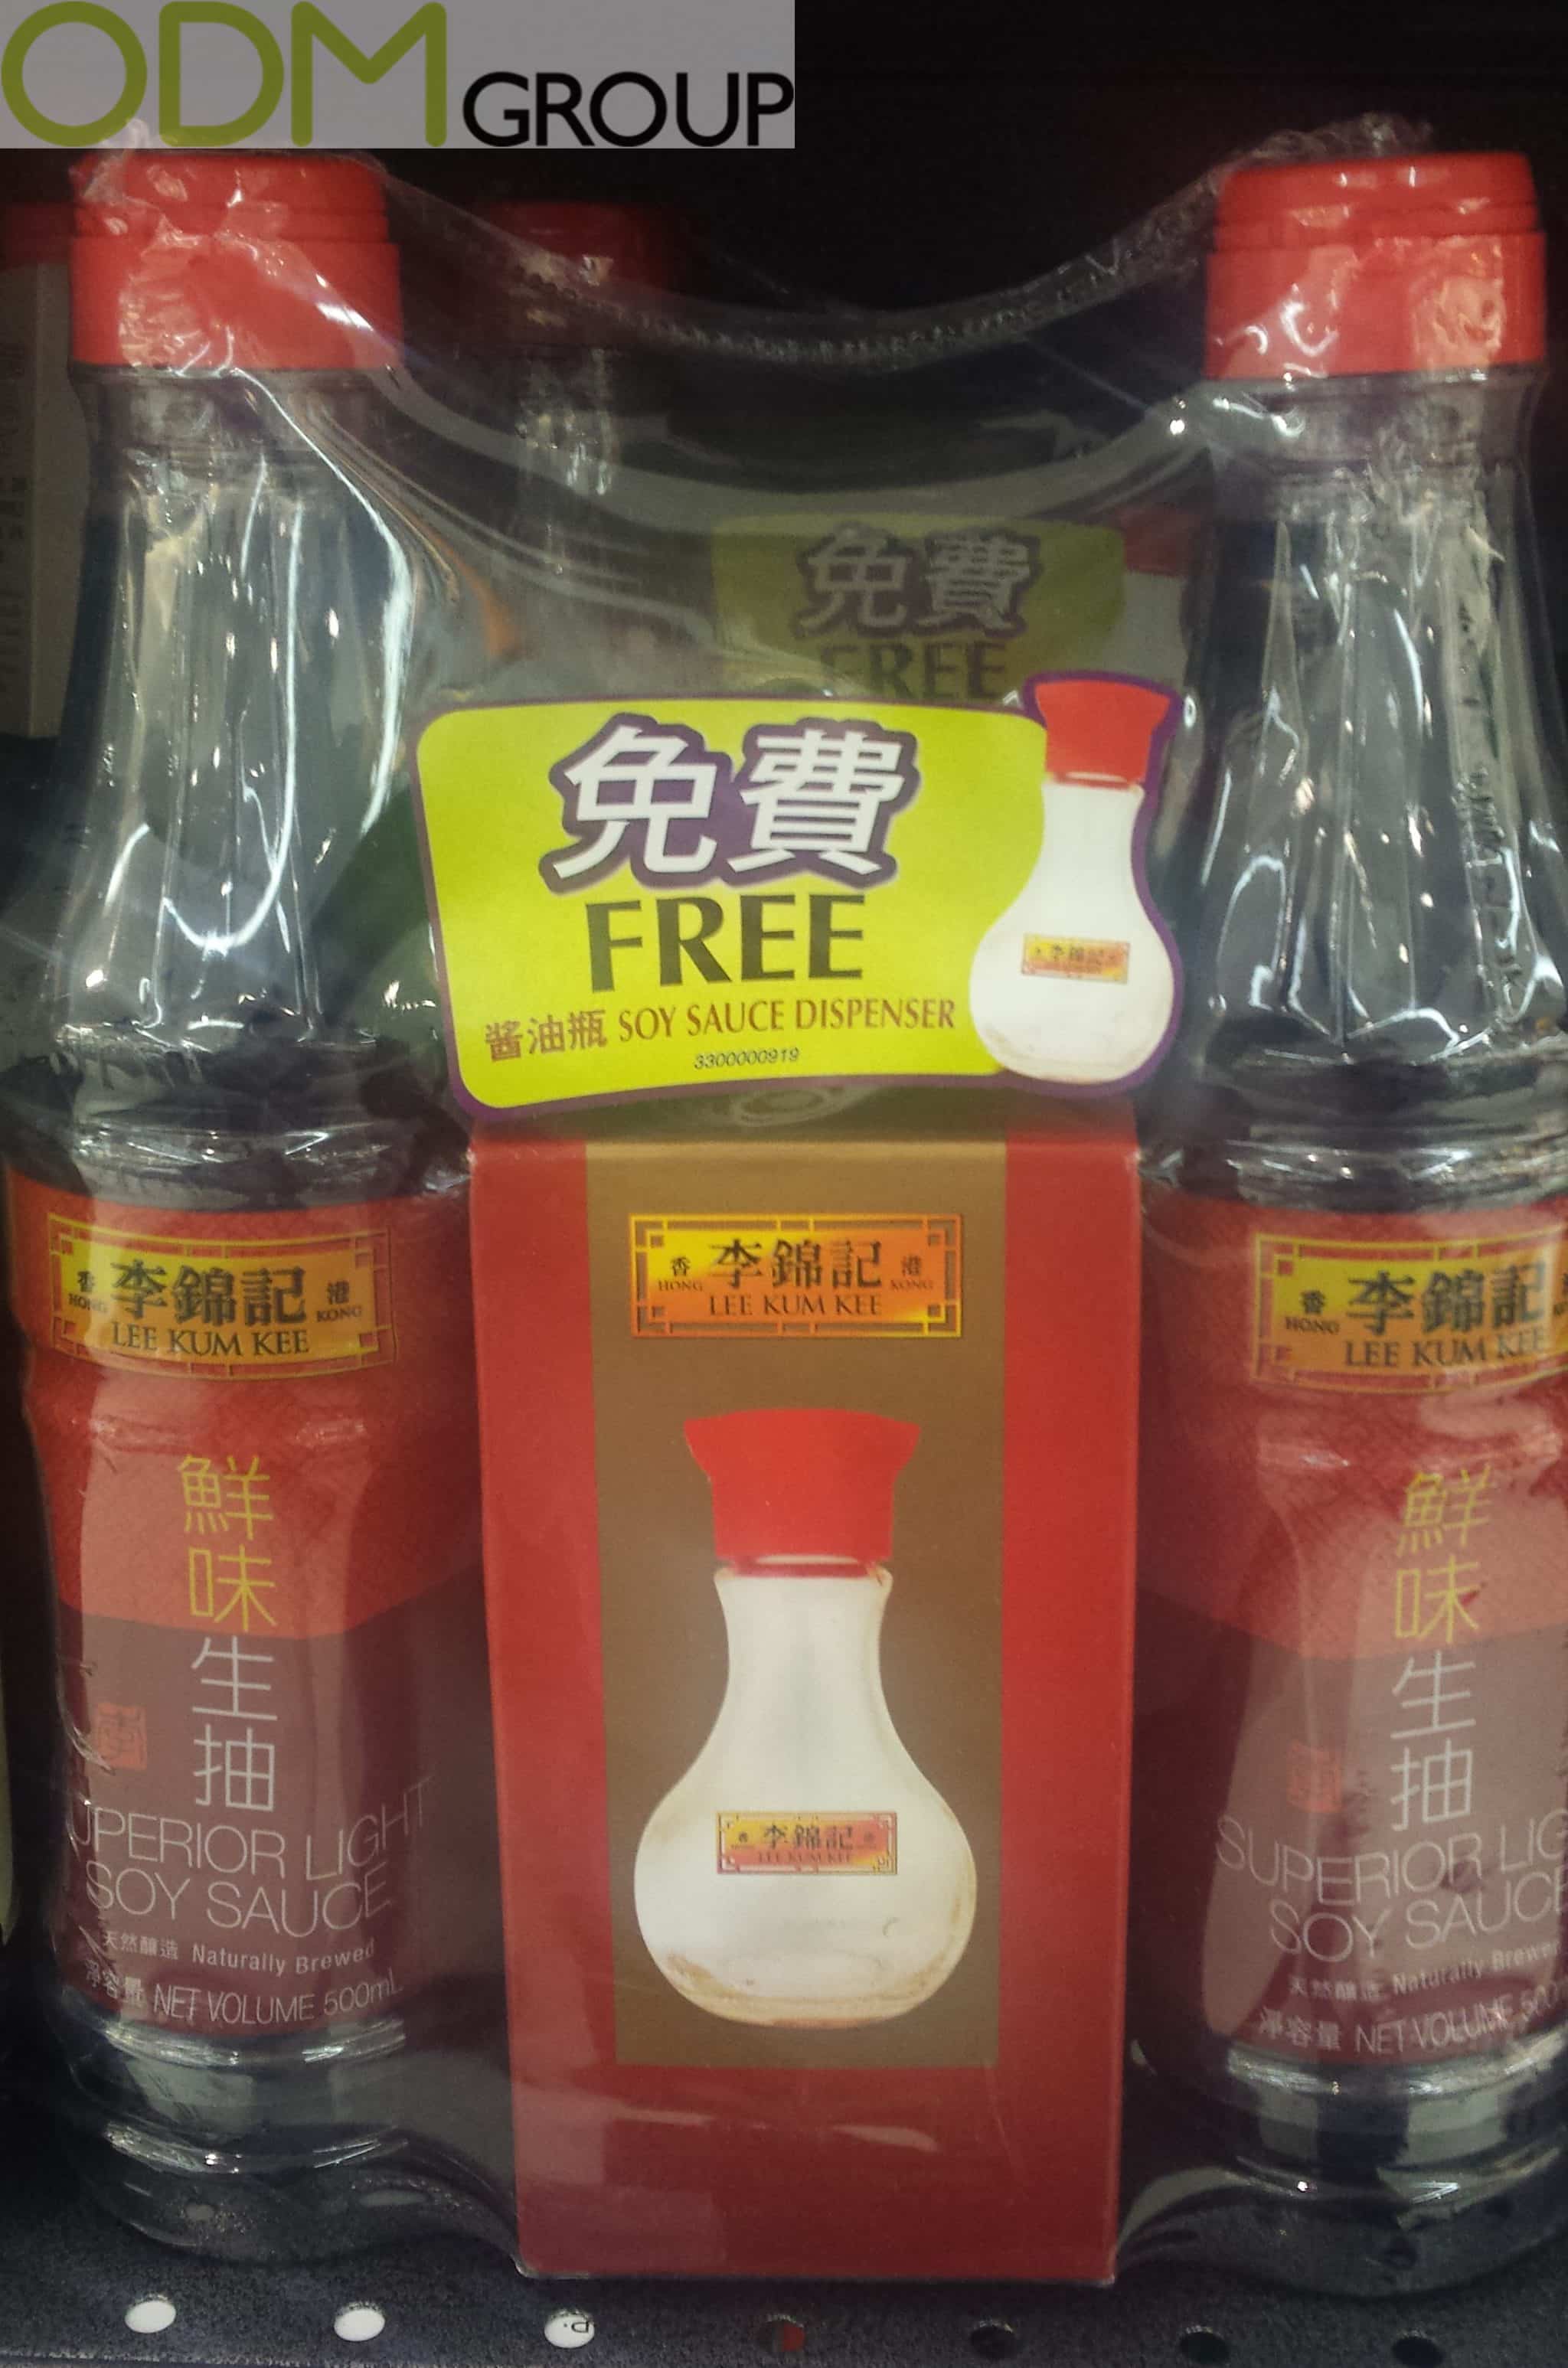 Promotional Gift by Lee Kum Kee - Soy Sauce Dispenser